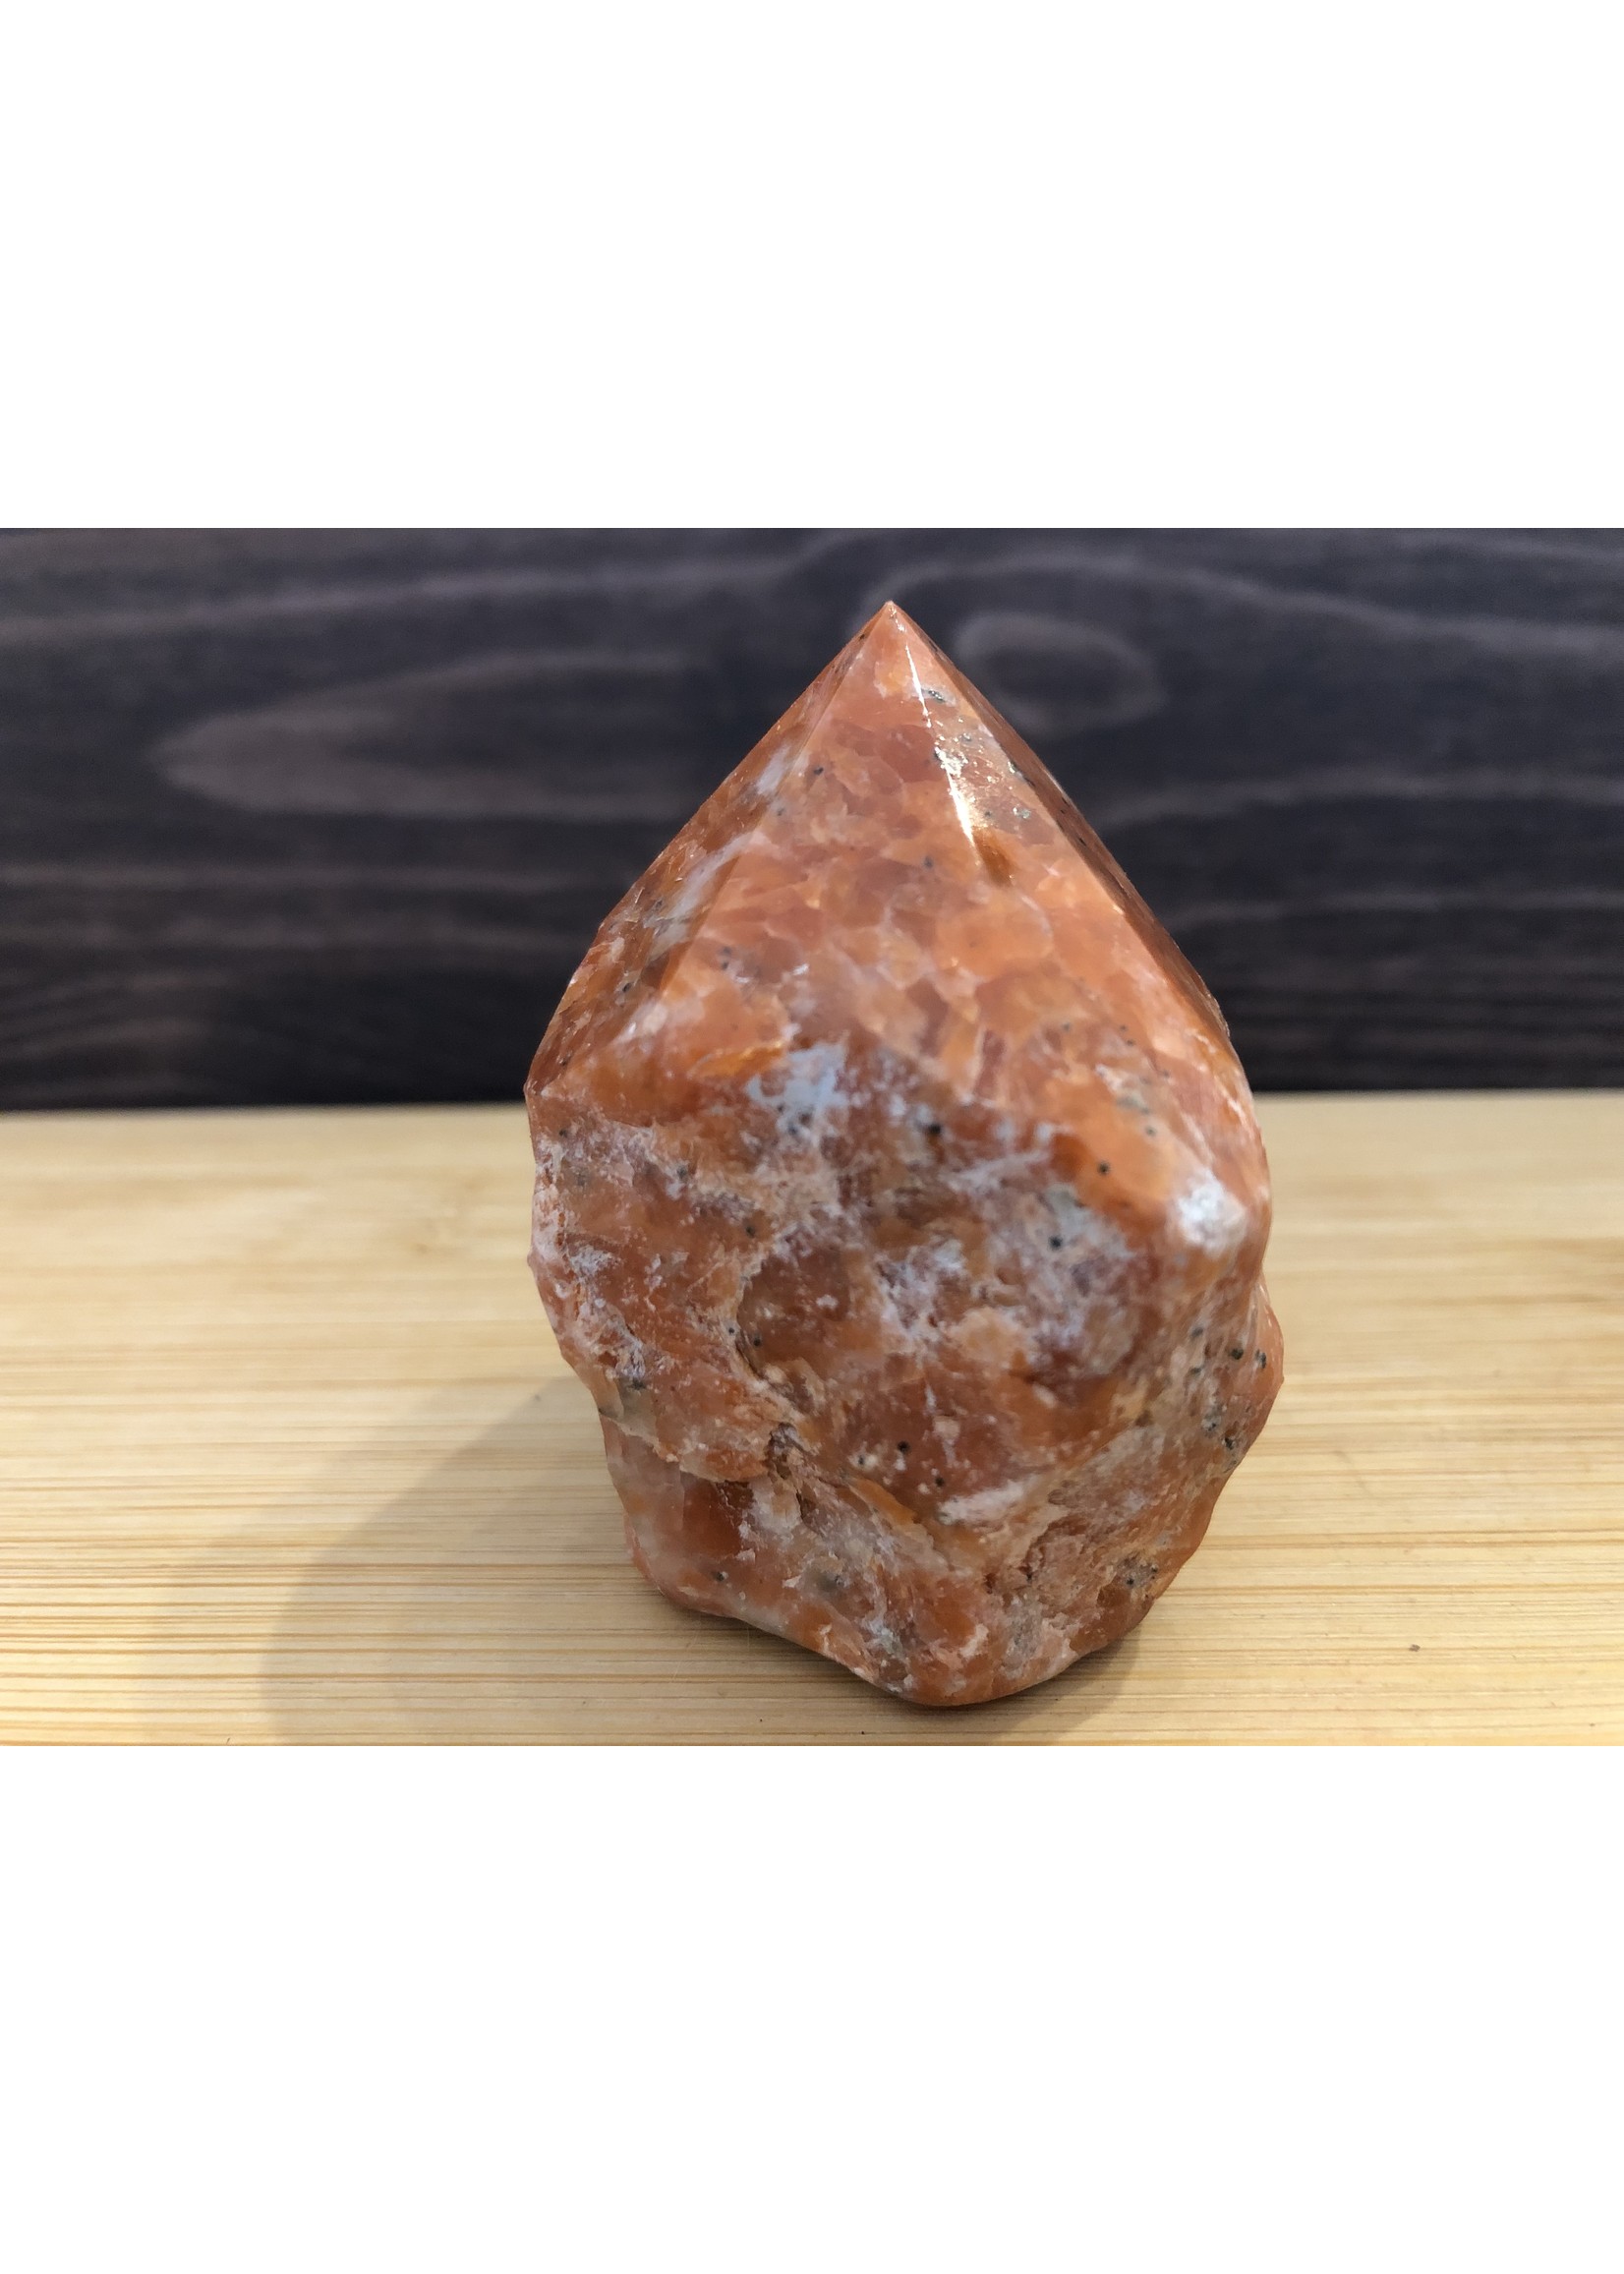 bright polished orange orchid calcite, crystal point orange calcite, is a natural stone that radiates joyful energy